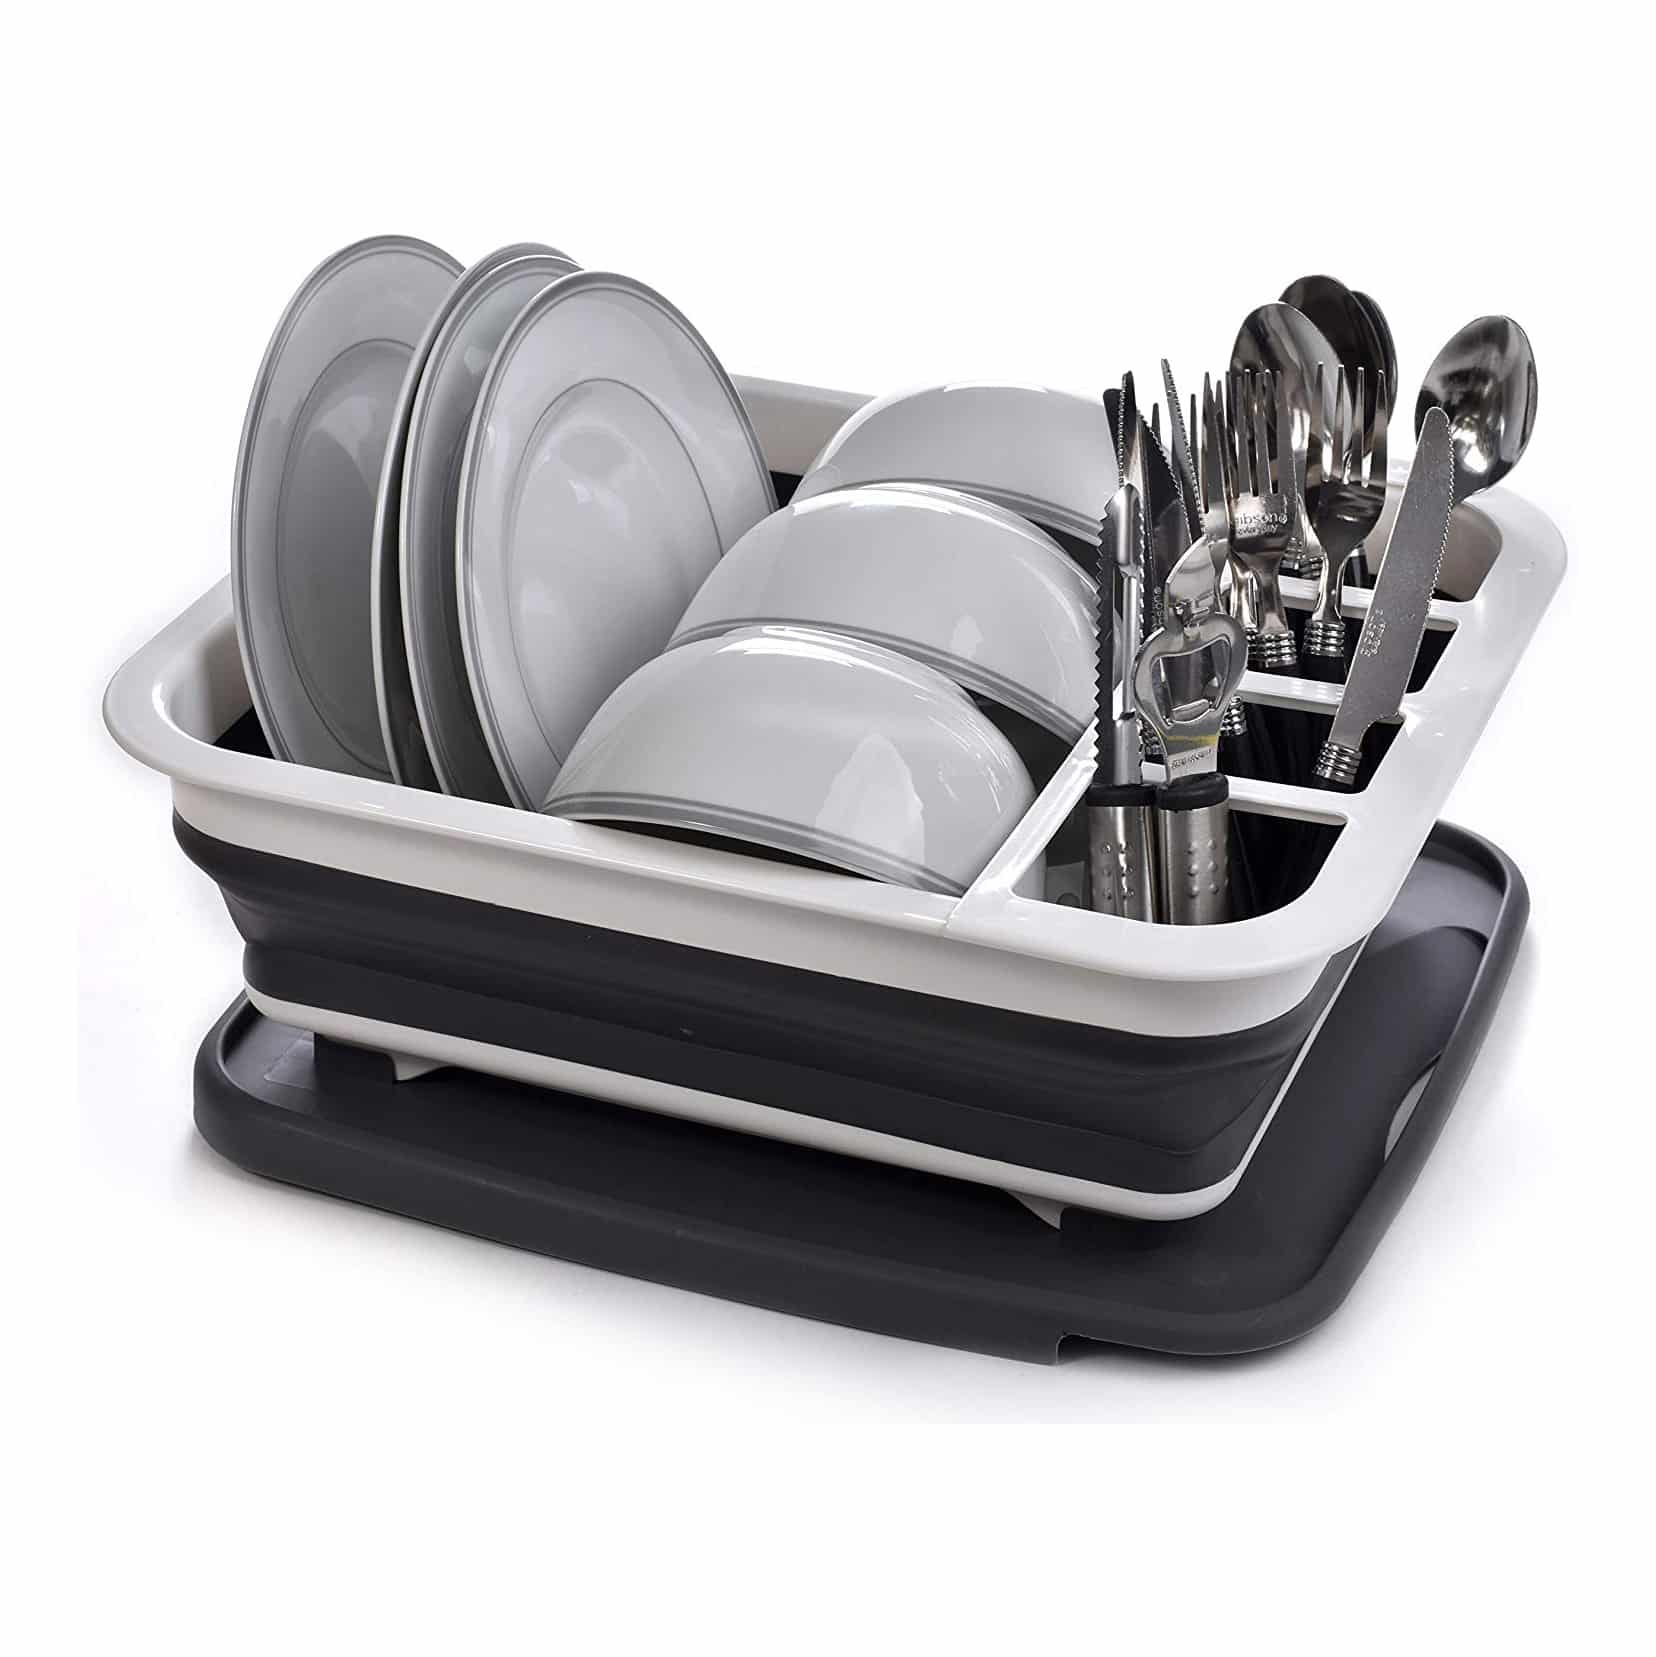 Masirs Collapsible Dish Drying Rack